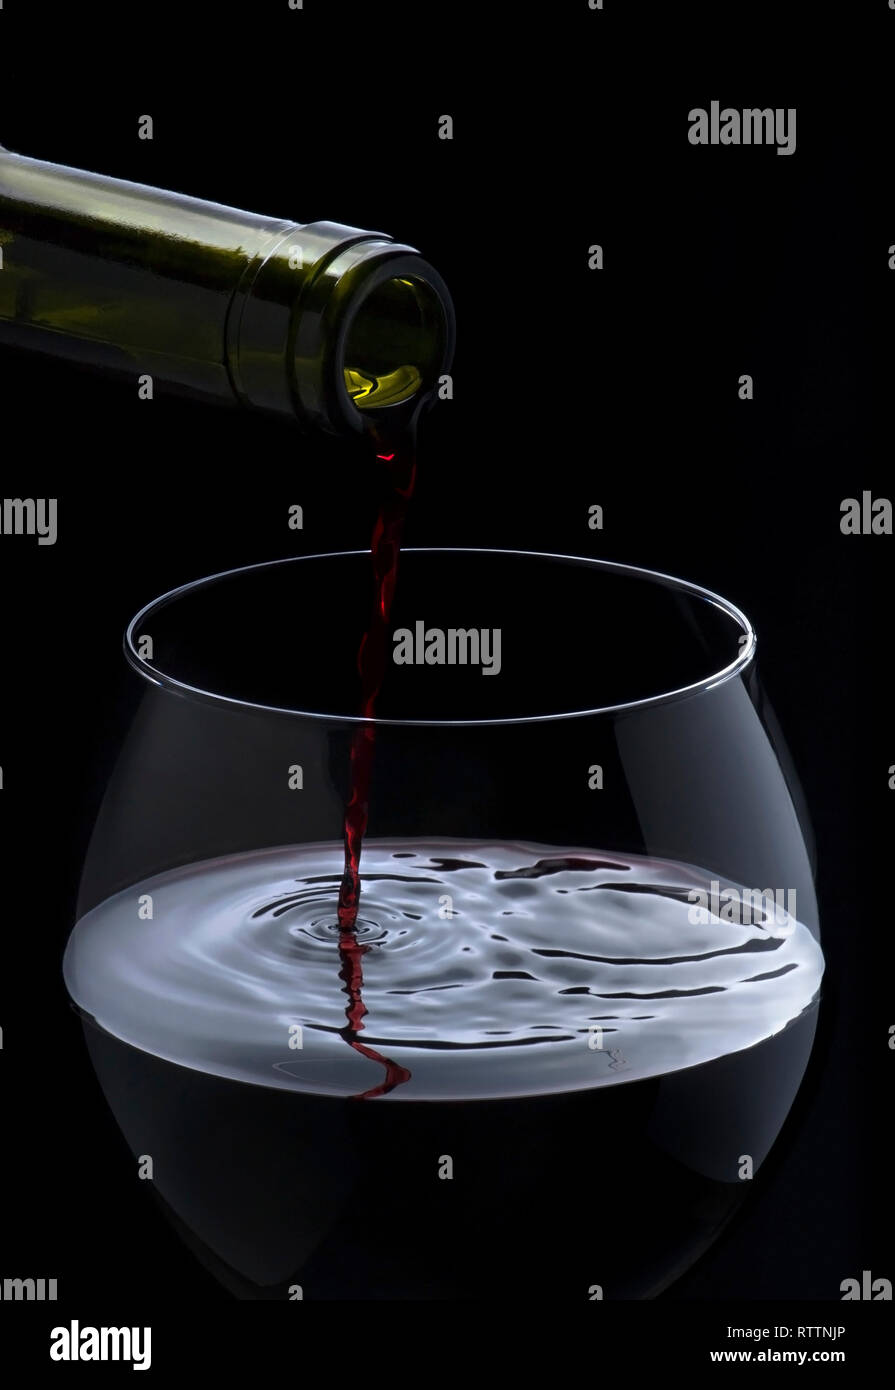 https://c8.alamy.com/comp/RTTNJP/red-wine-pouring-down-from-a-bottle-RTTNJP.jpg